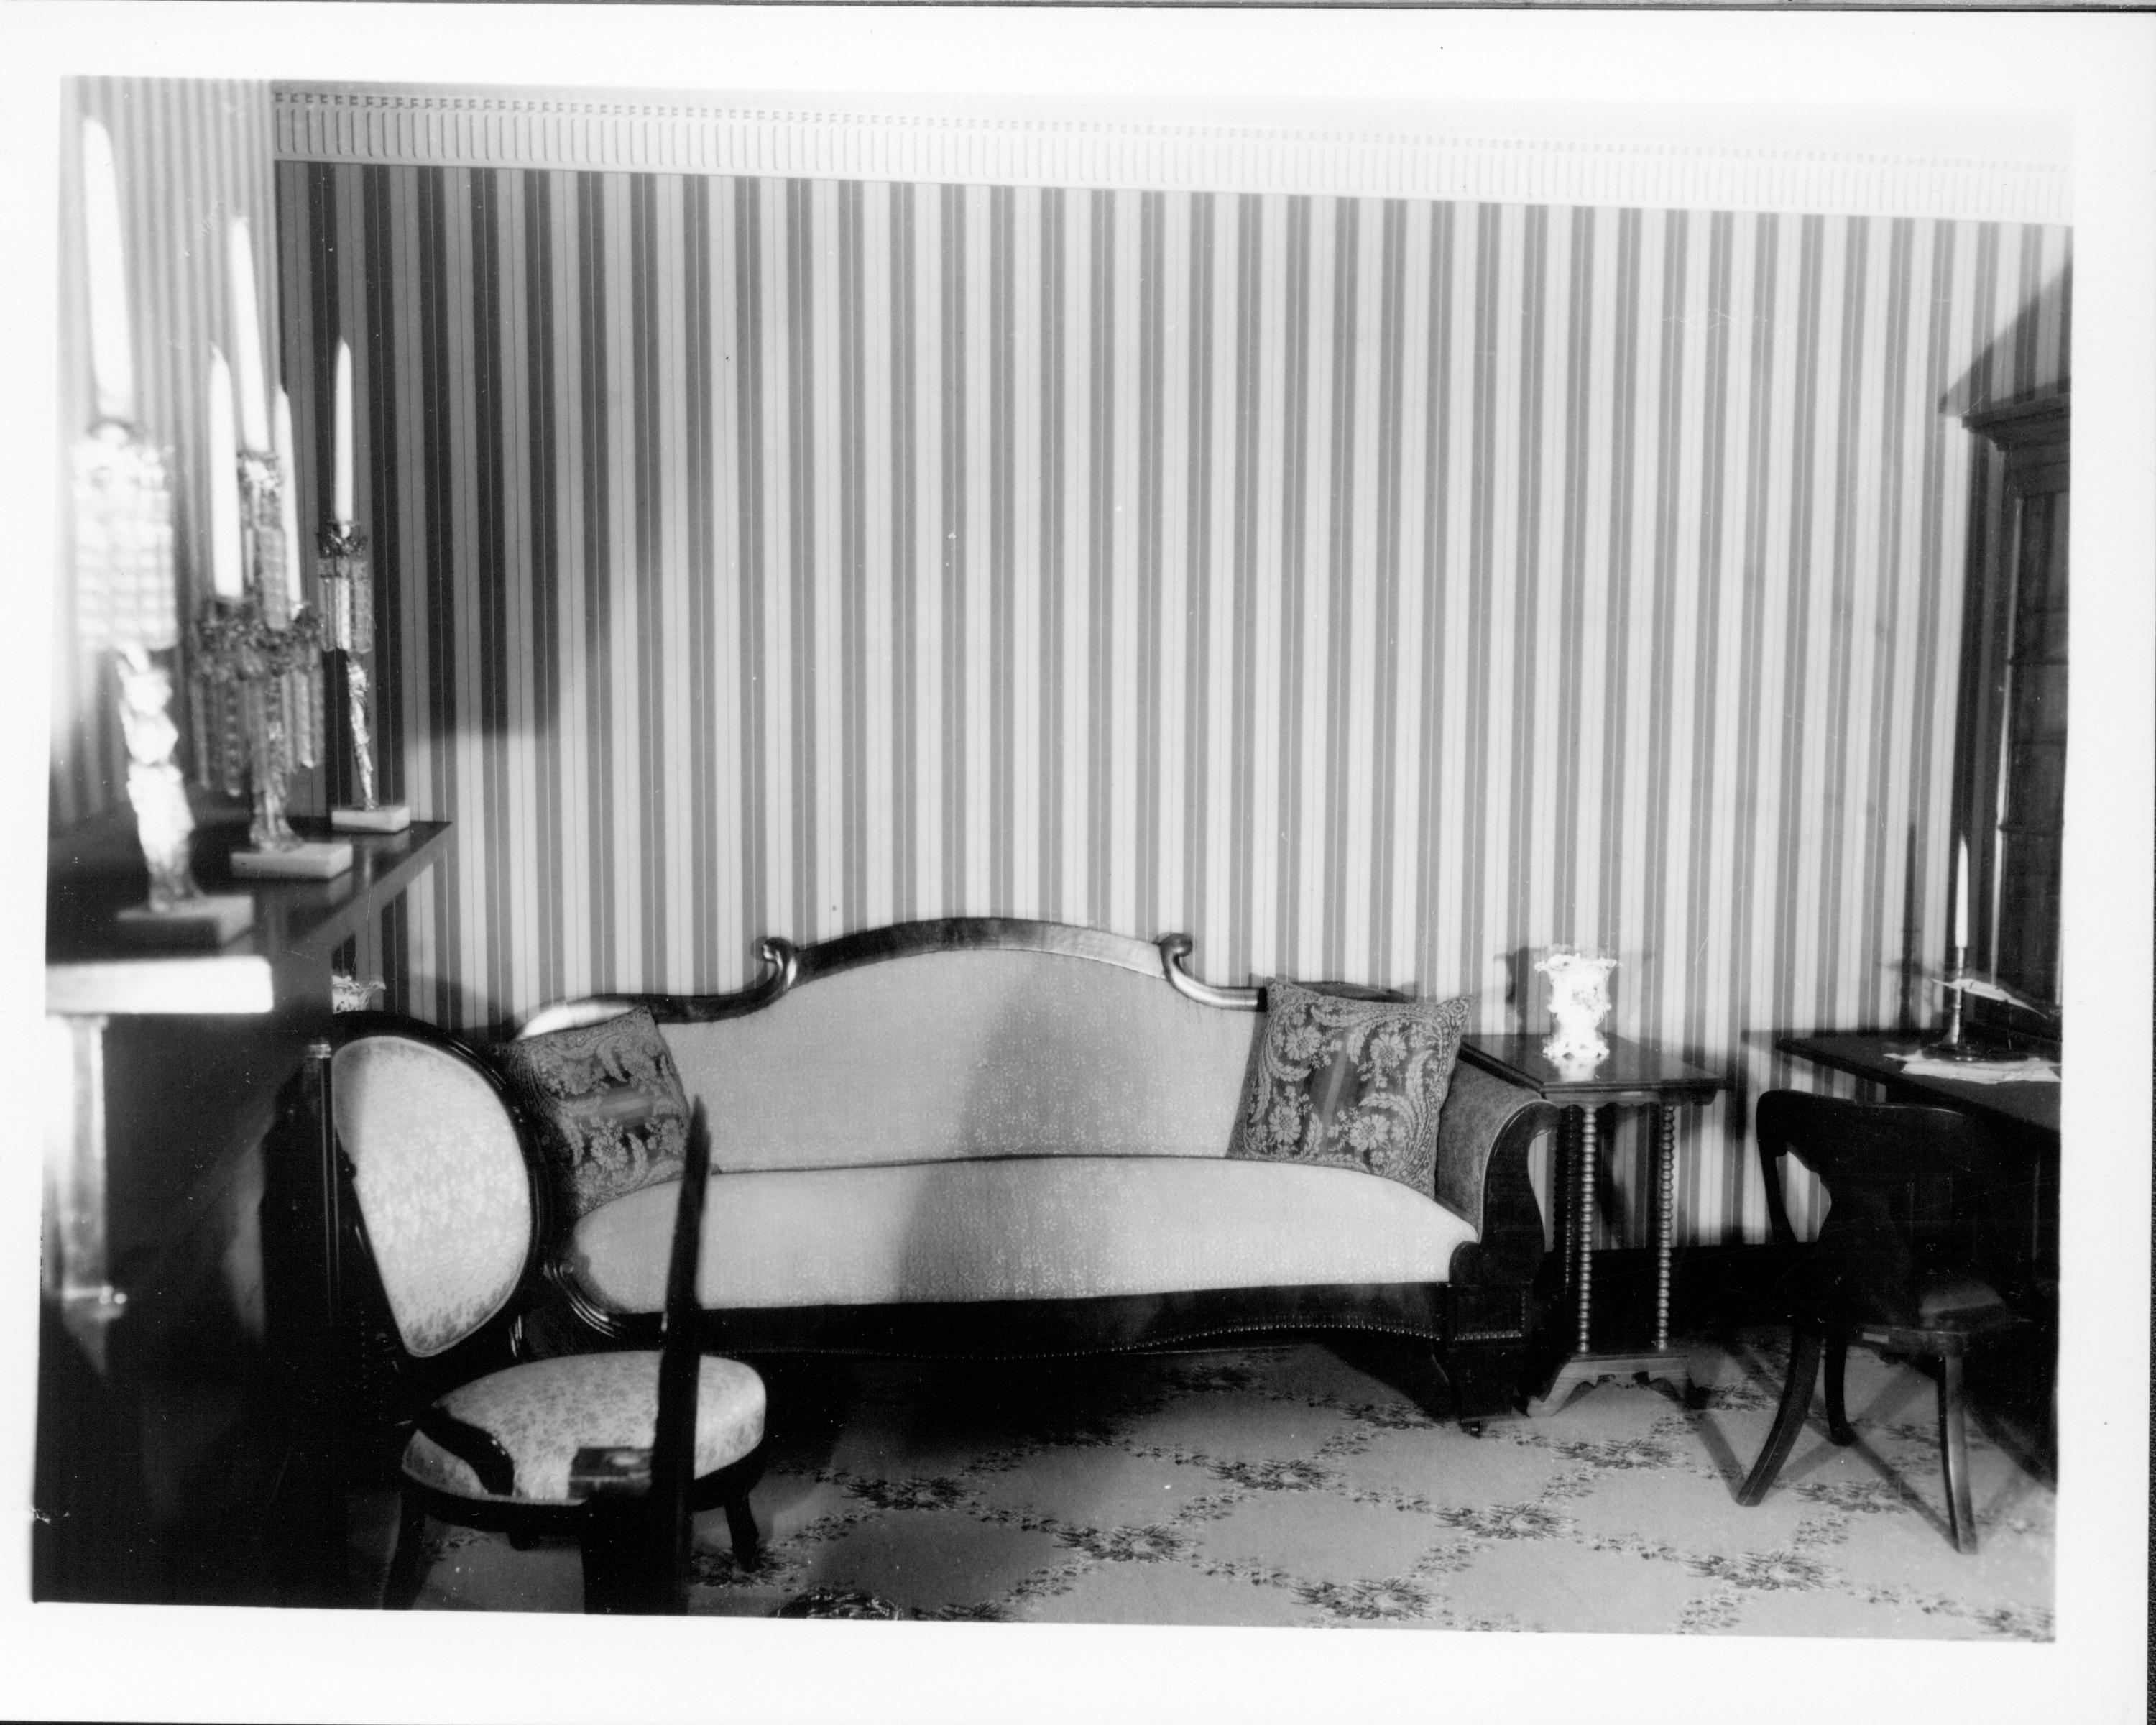 Rear Parlor - Lincoln Home neg.#59, class.#310 Lincoln, Home, Sitting, Room, Parlor